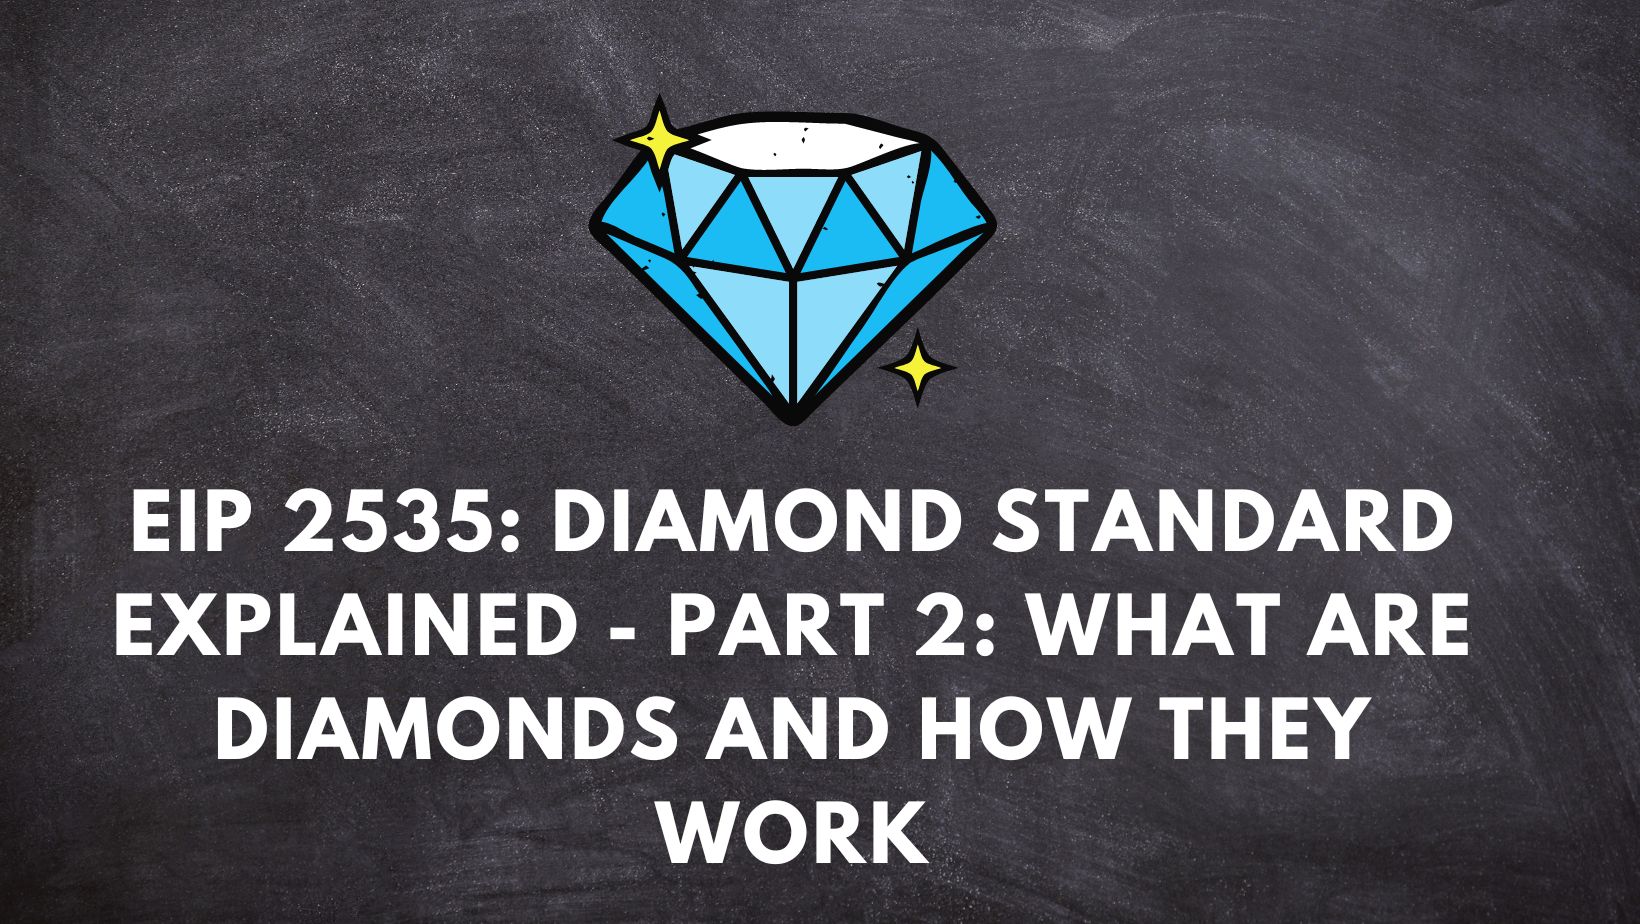 EIP 2535: Diamond standard explained – Part 2: What are diamonds and how they work